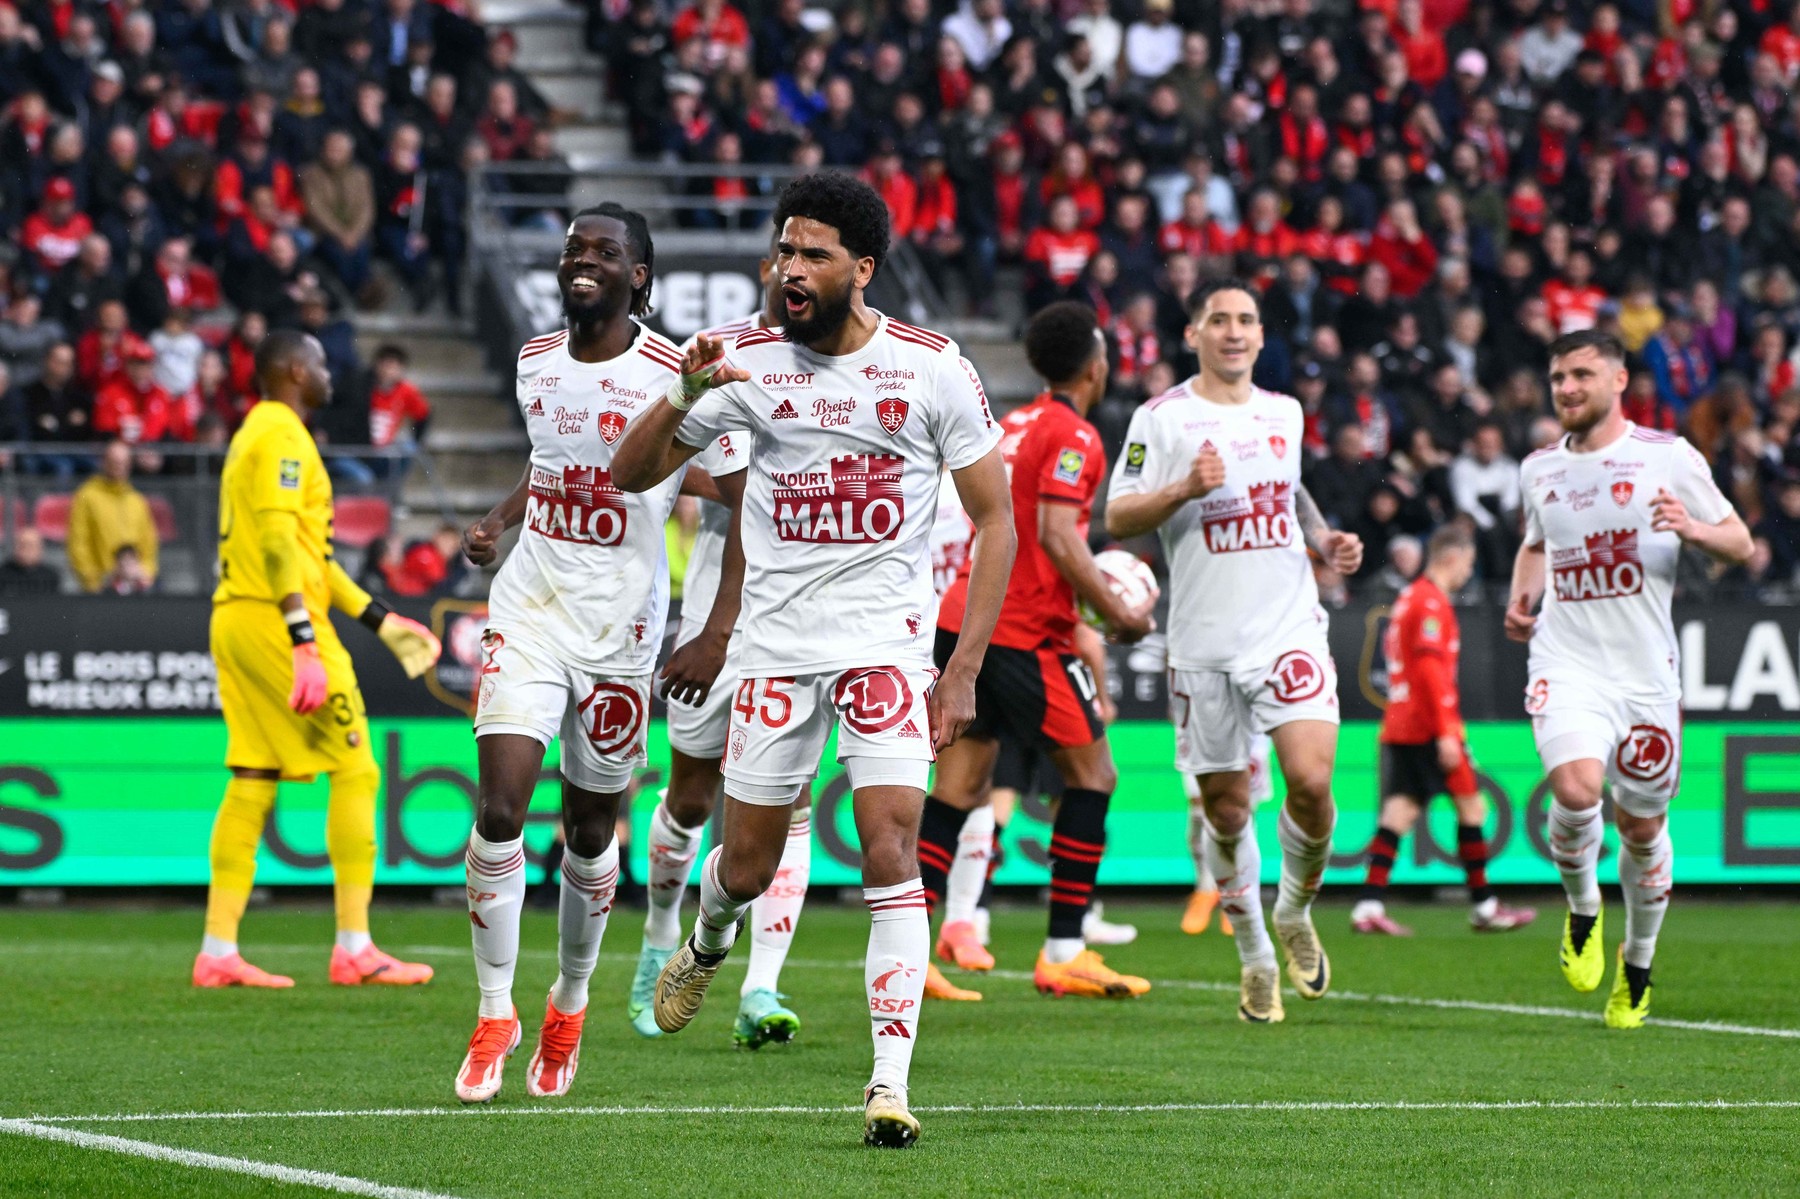 Mahdi CAMARA ( 45 - Brest ) celebrates after scoring during the Ligue 1 match between Stade Rennais FC and Stade Brestois 29 at Roazhon Park on April 28, 2024 in Rennes, France. ( Photo by federico pestellini / panoramic ) -,Image: 868688867, License: Rights-managed, Restrictions: , Model Release: no, Credit line: Federico Pestellini / Panoramic / Profimedia